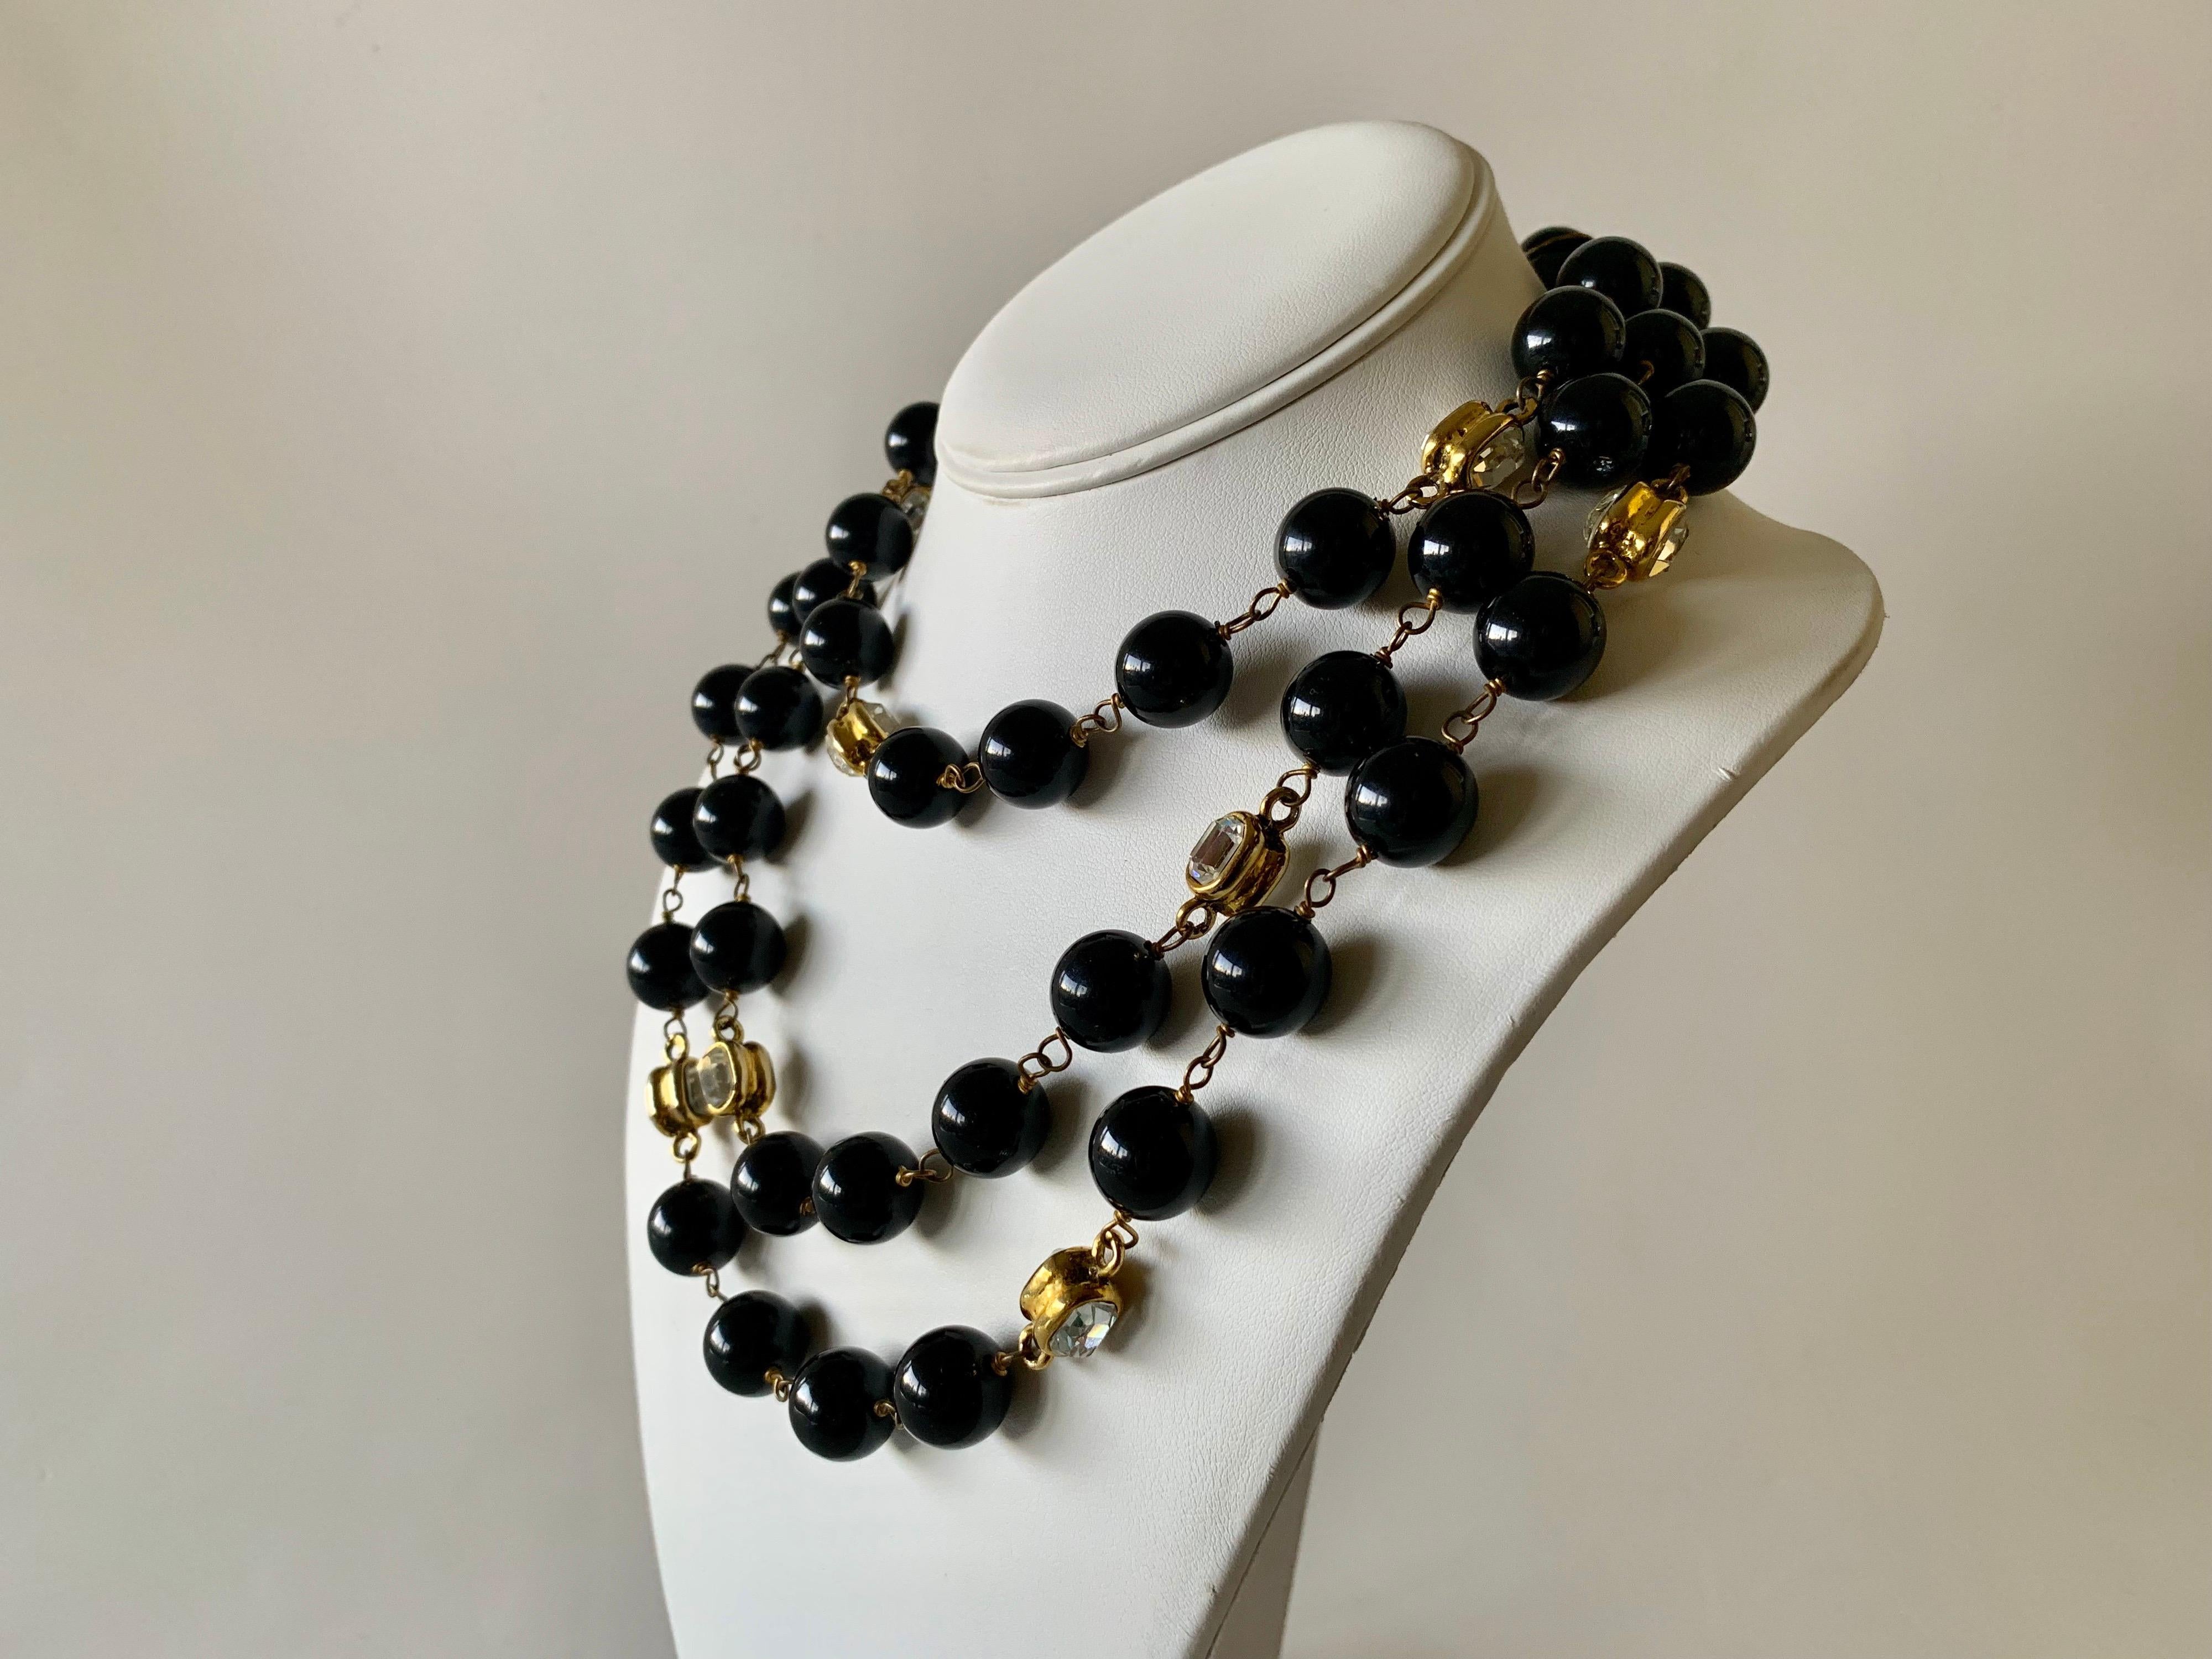 Scarce vintage Coco Chanel sautoir necklace made in France, 1984 - the long statement necklace features large black beads which in all Coco Chanel manner are accented by large diamante stones set in gilded metal. What make's this particular necklace